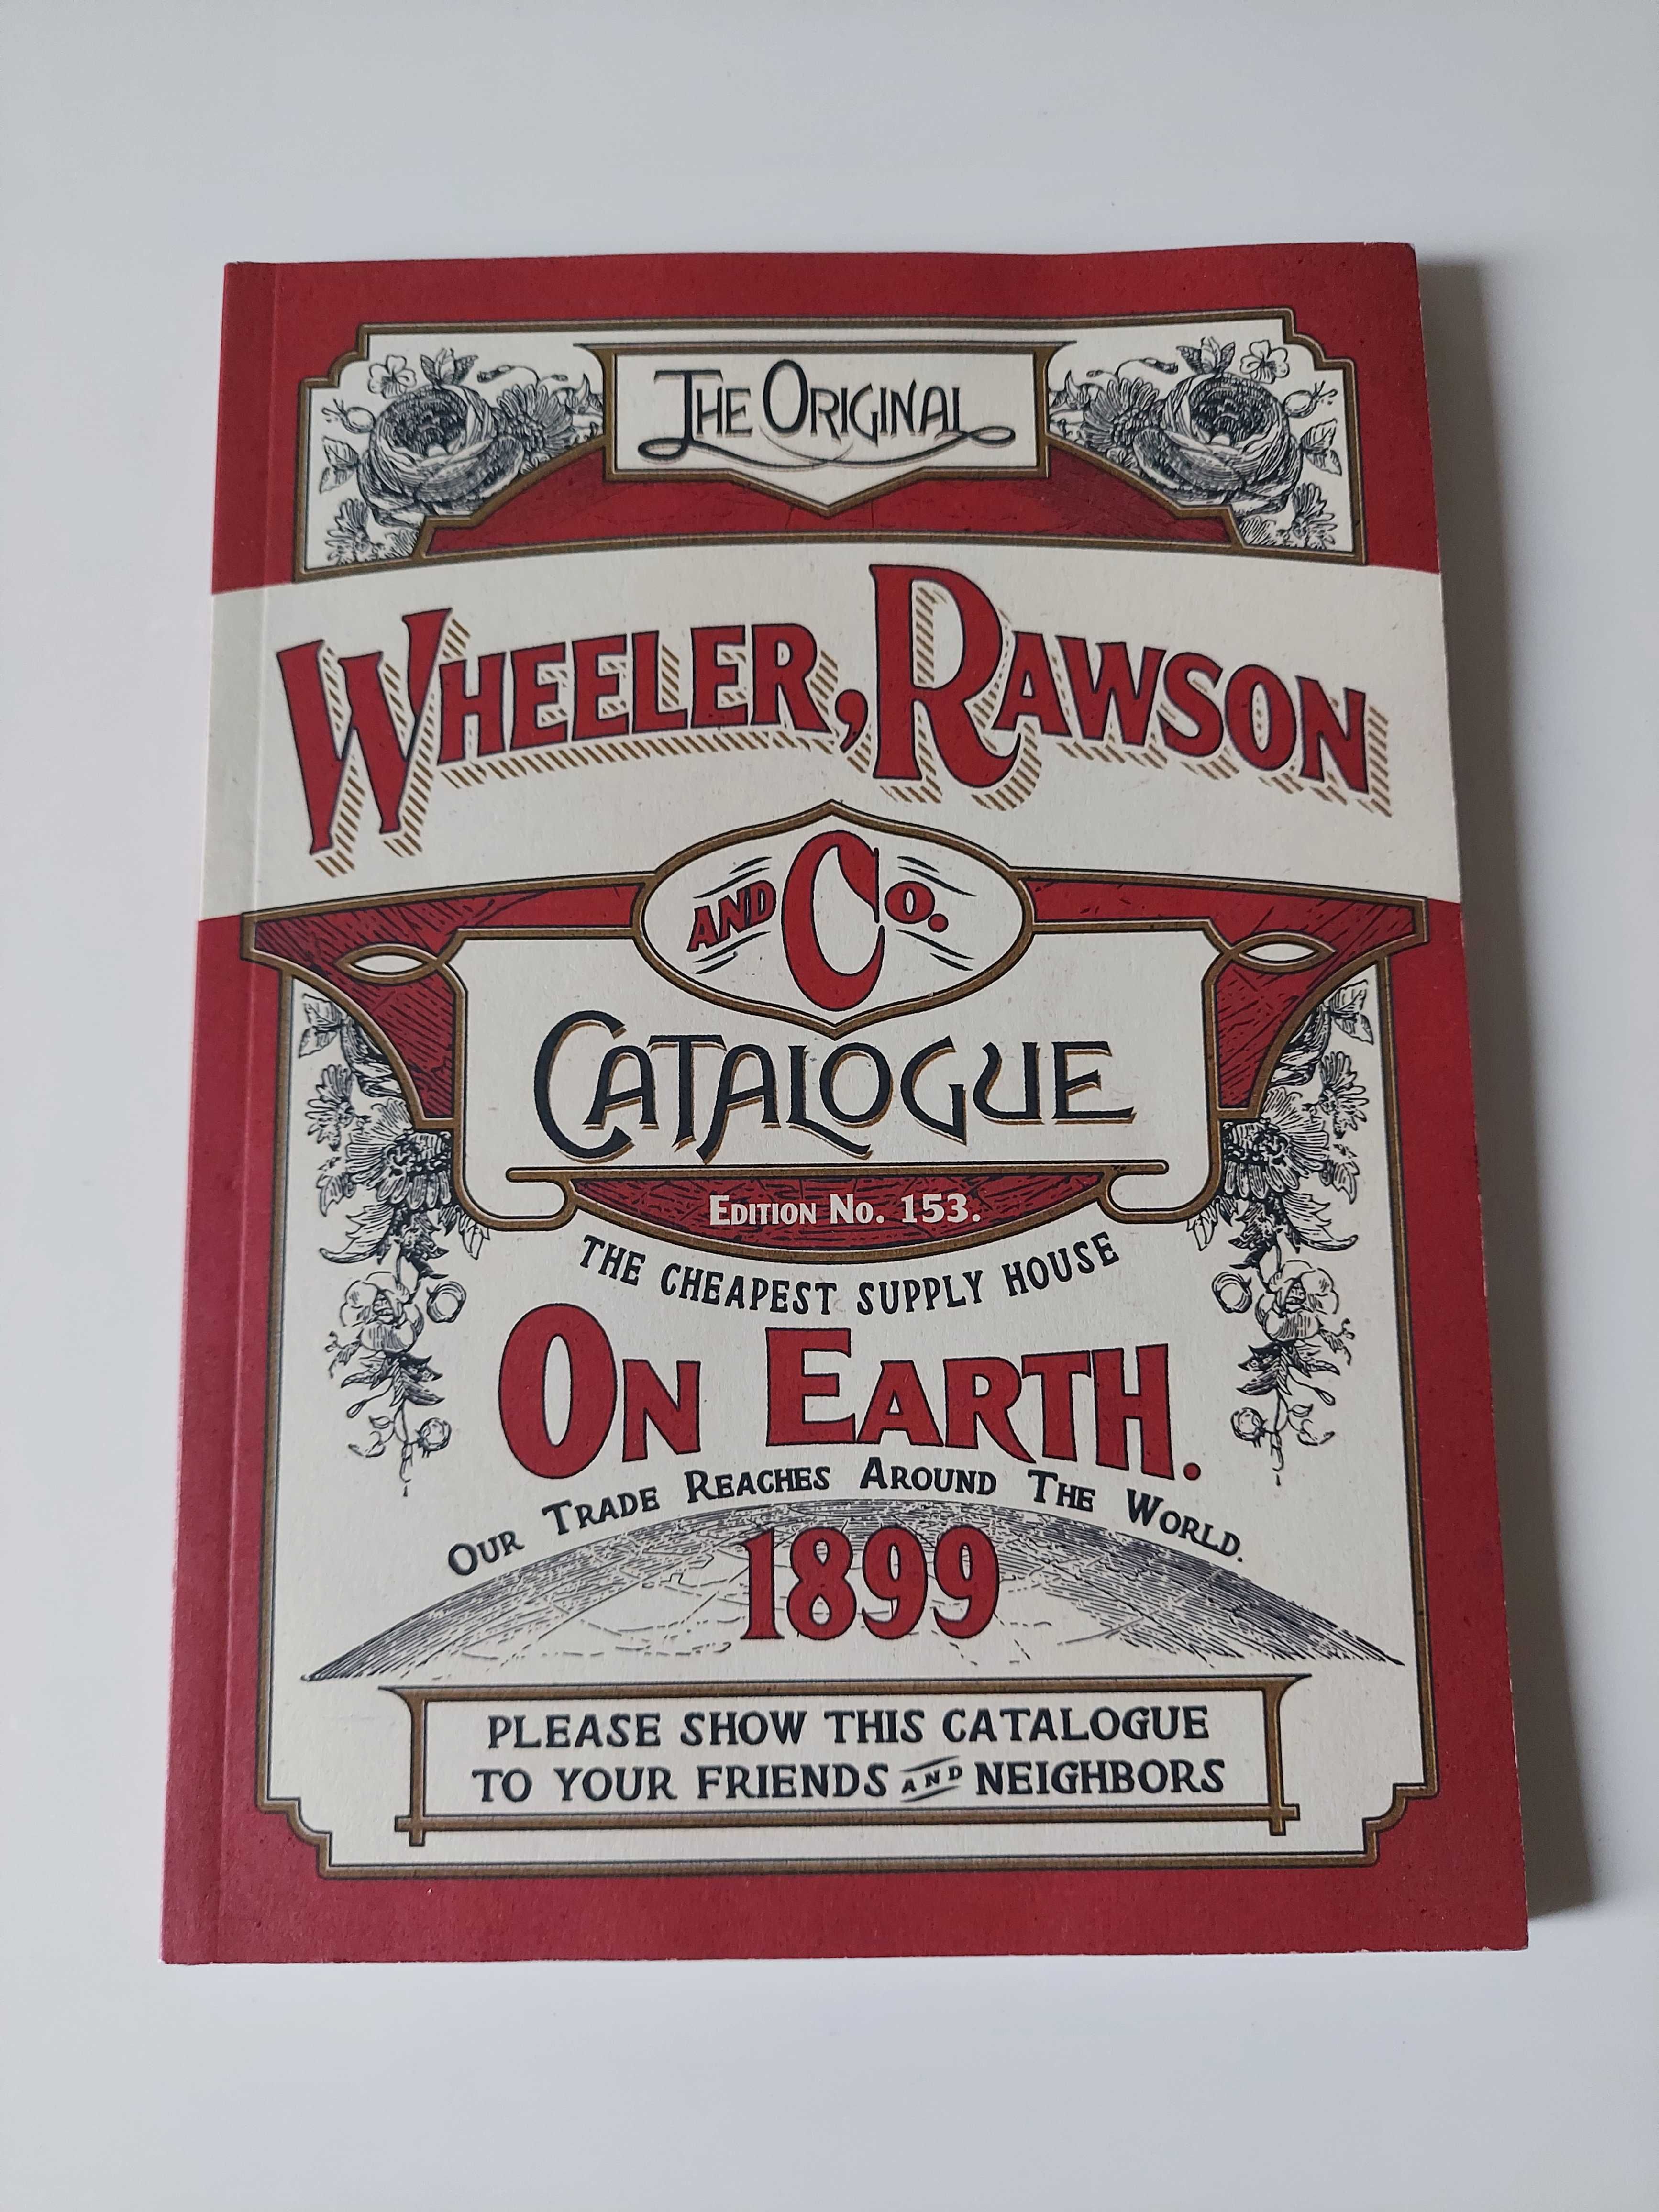 Red Dead redemption 2 Wheeler, Rawson and Co. Catalogue